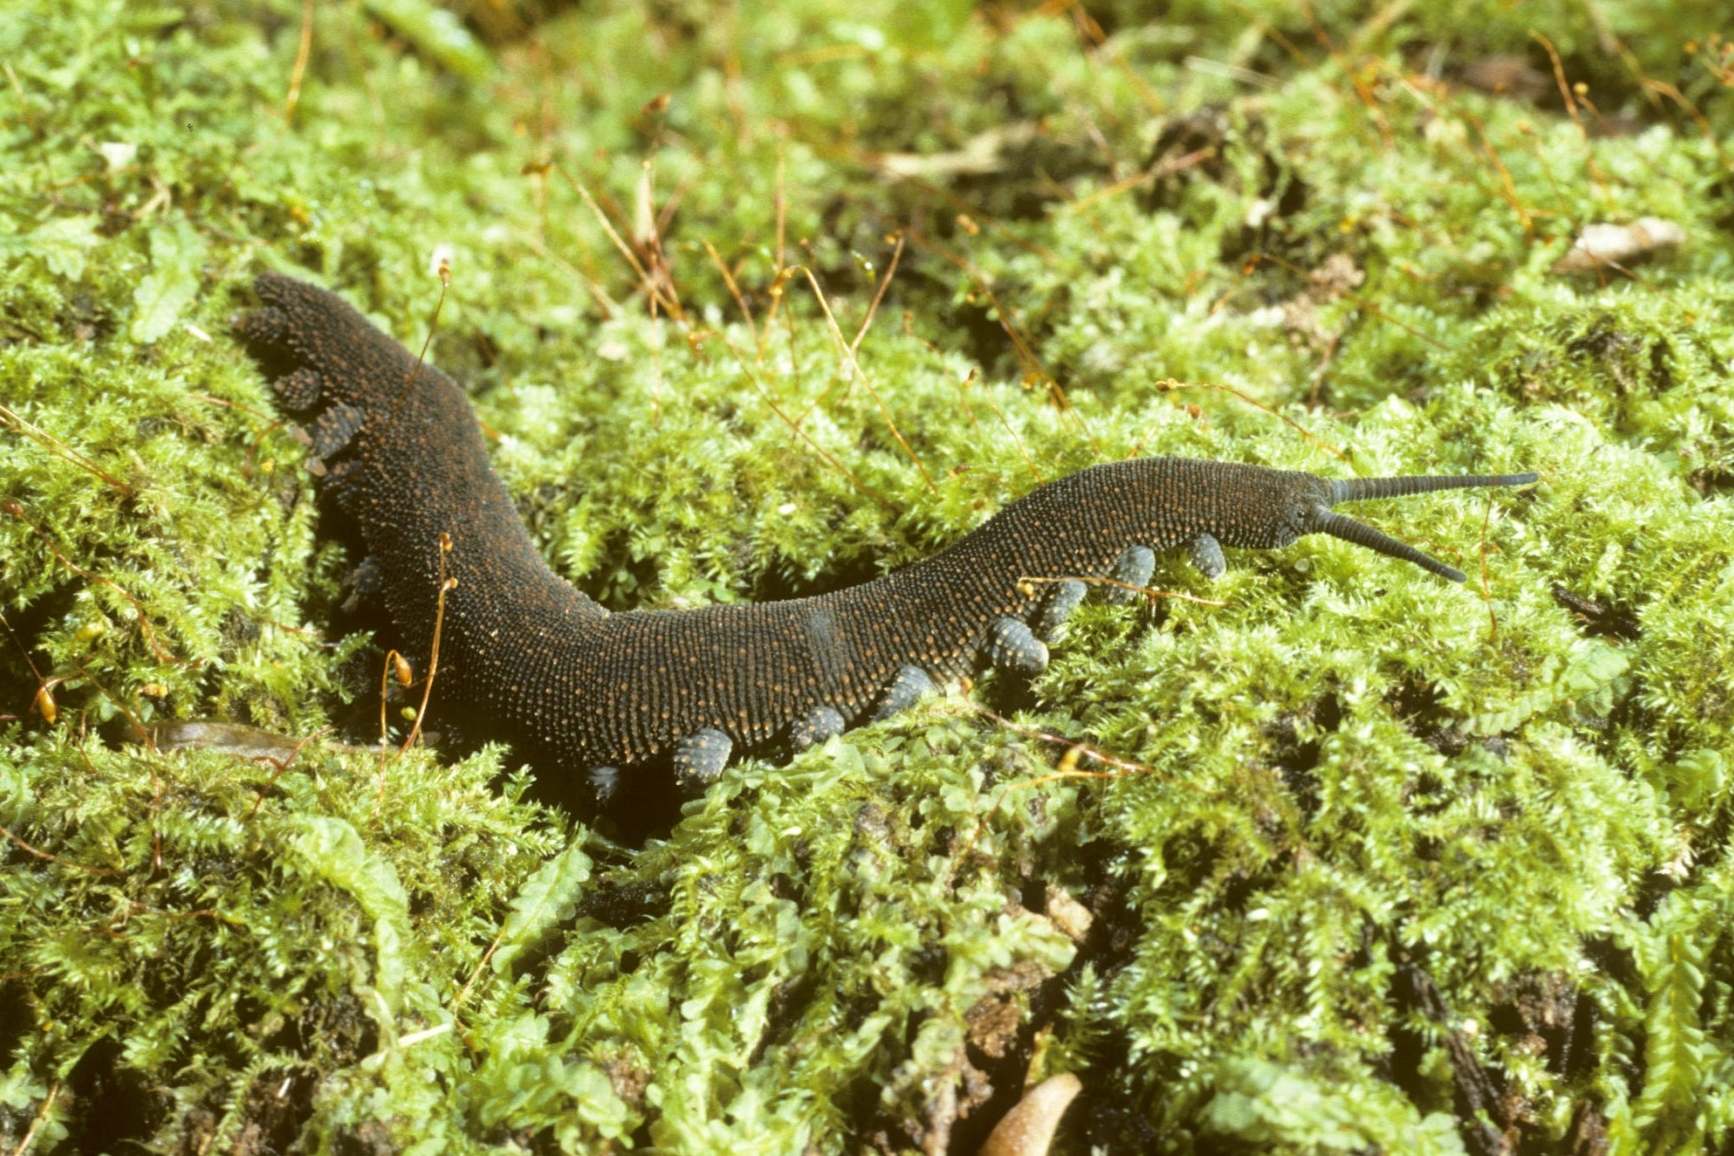 The velvet worm inhabits moist places such as inside and under rotting logs, beneath stones and leaf litter